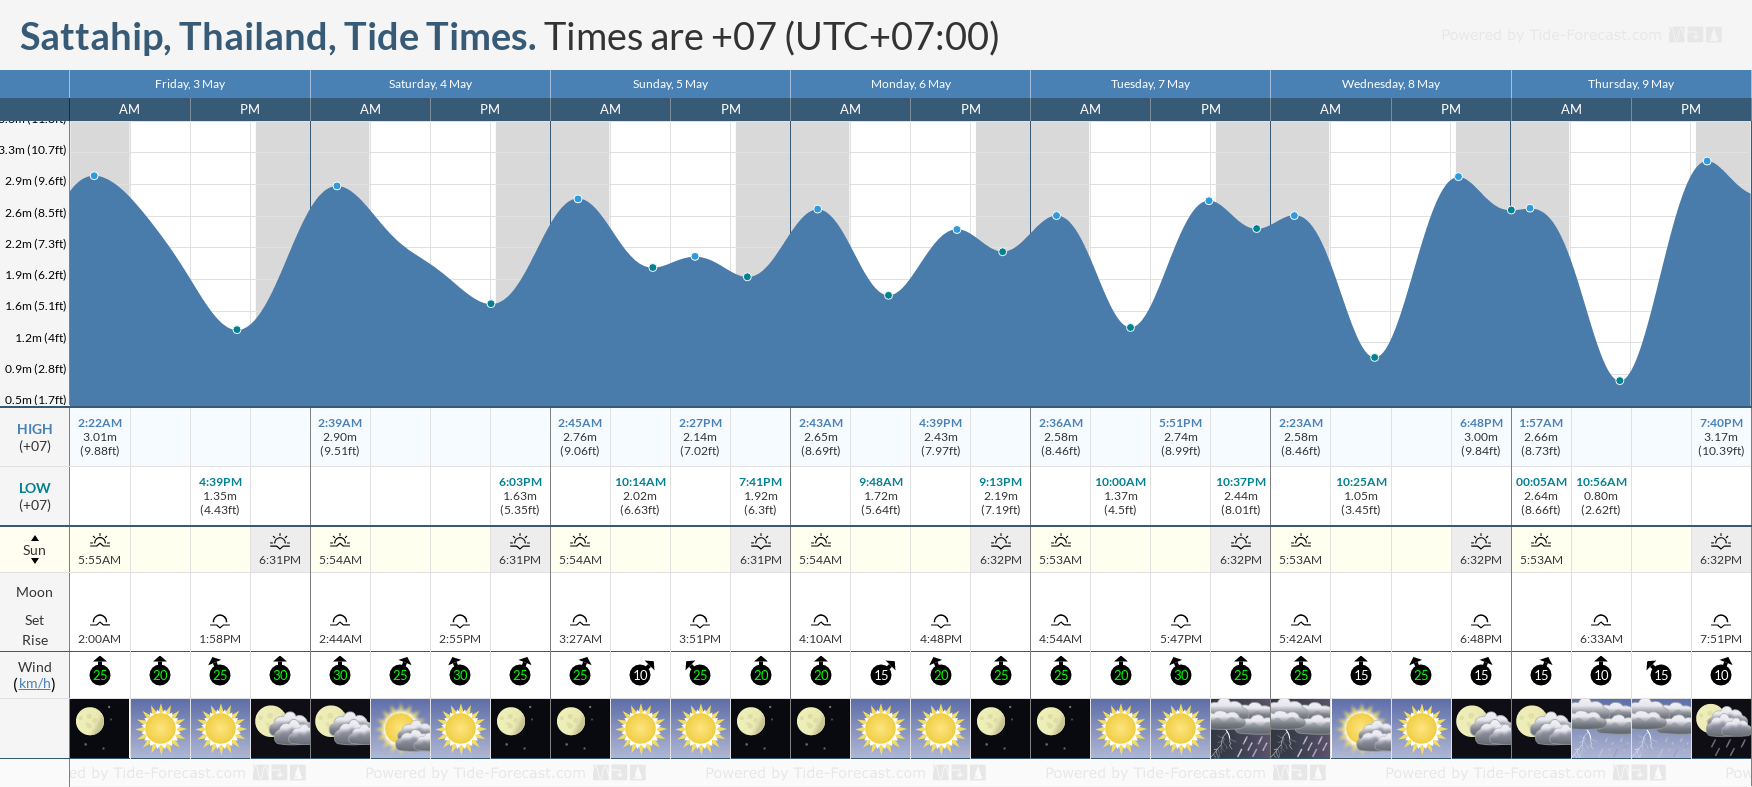 Sattahip, Thailand Tide Chart including high and low tide tide times for the next 7 days